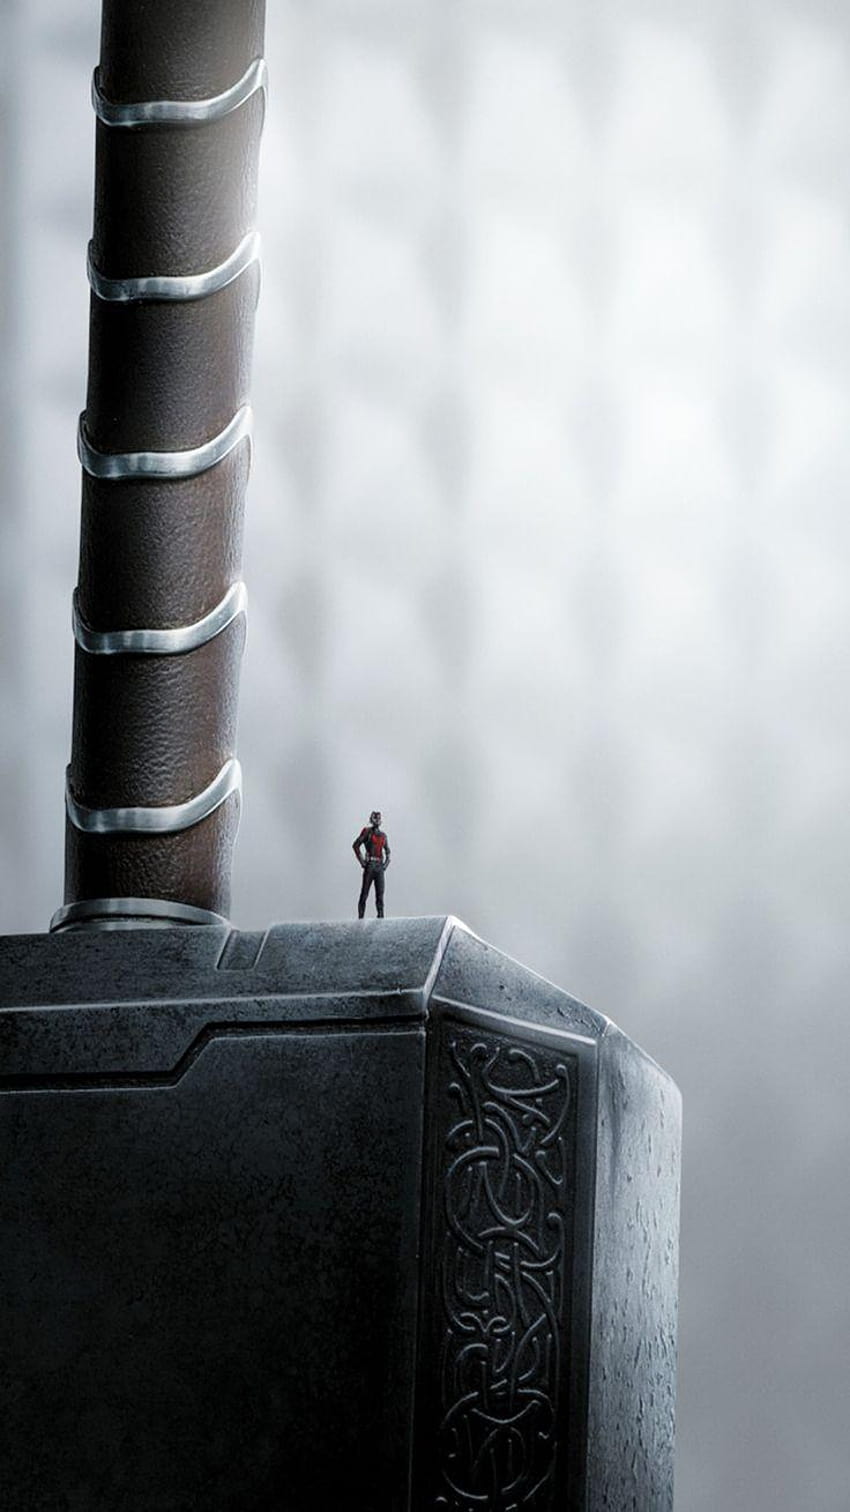 ↑↑TAP AND GET THE APP! Art Creative Ant Man Movie, thor hammer smartphone HD phone wallpaper